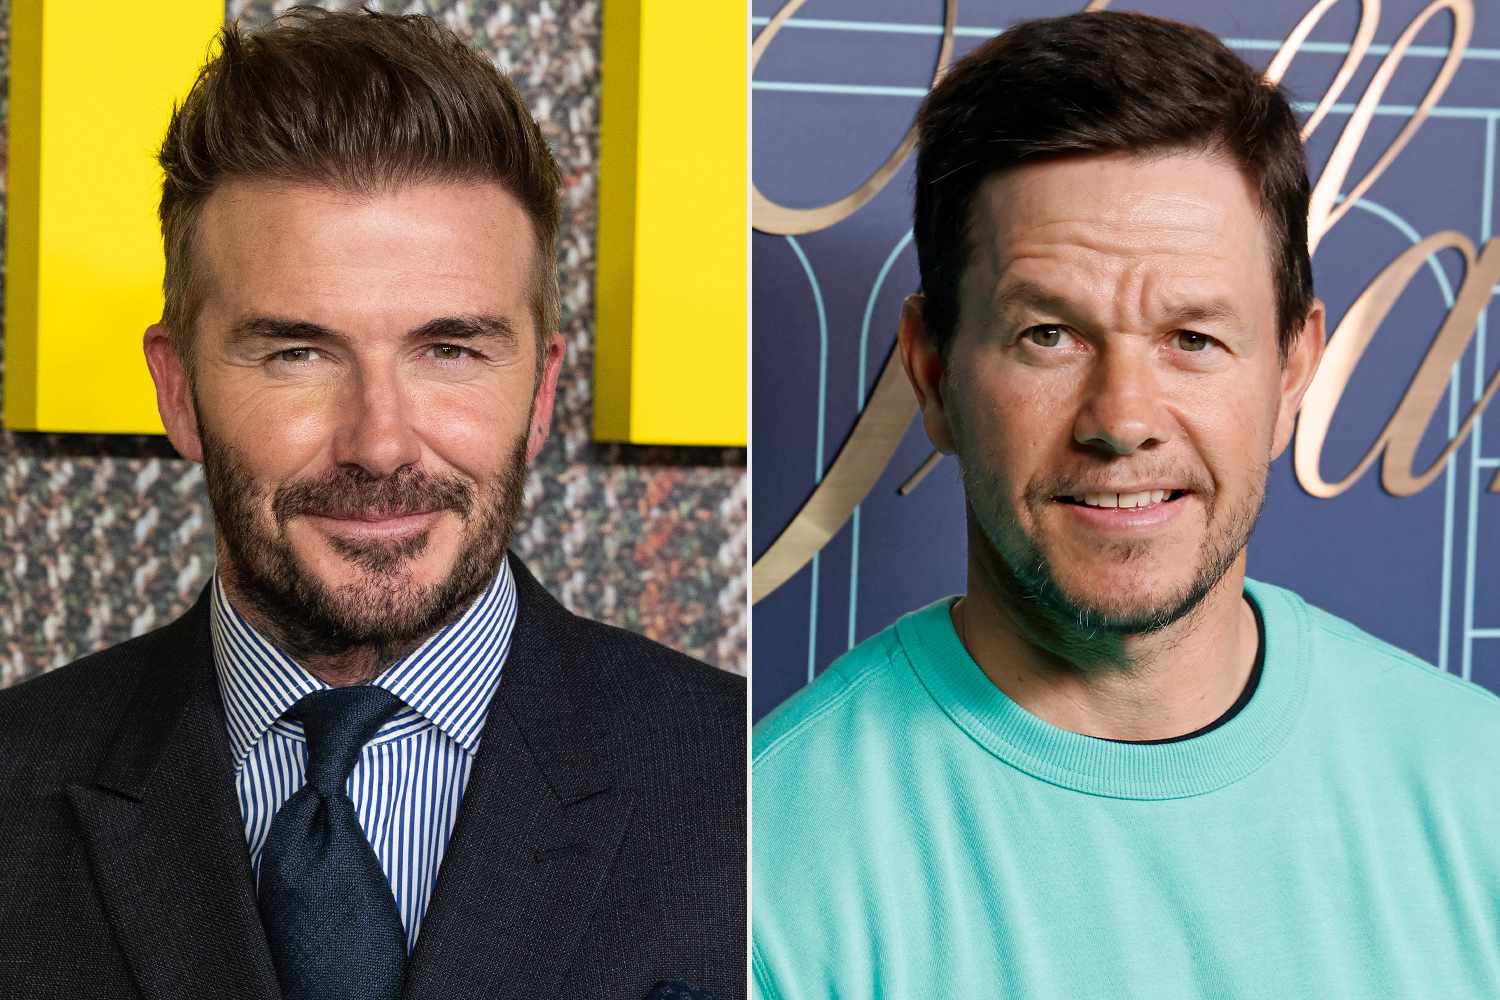 David Beckham and Mark Wahlberg's Fitness Company F45 Reach Agreement and Dissolve Lawsuit